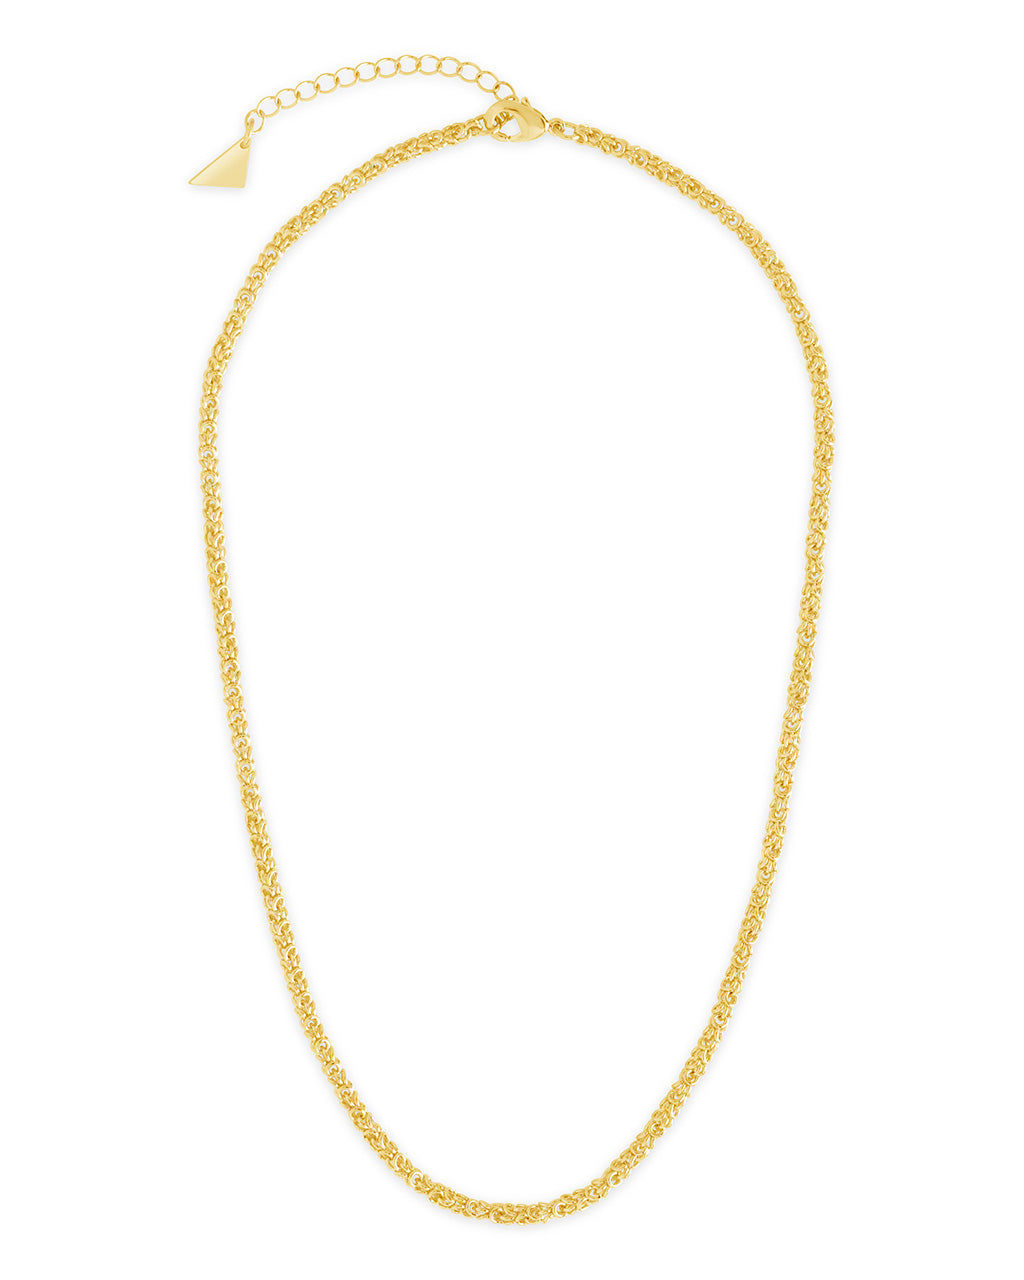 Moira Chain Necklace Sterling Forever Gold 